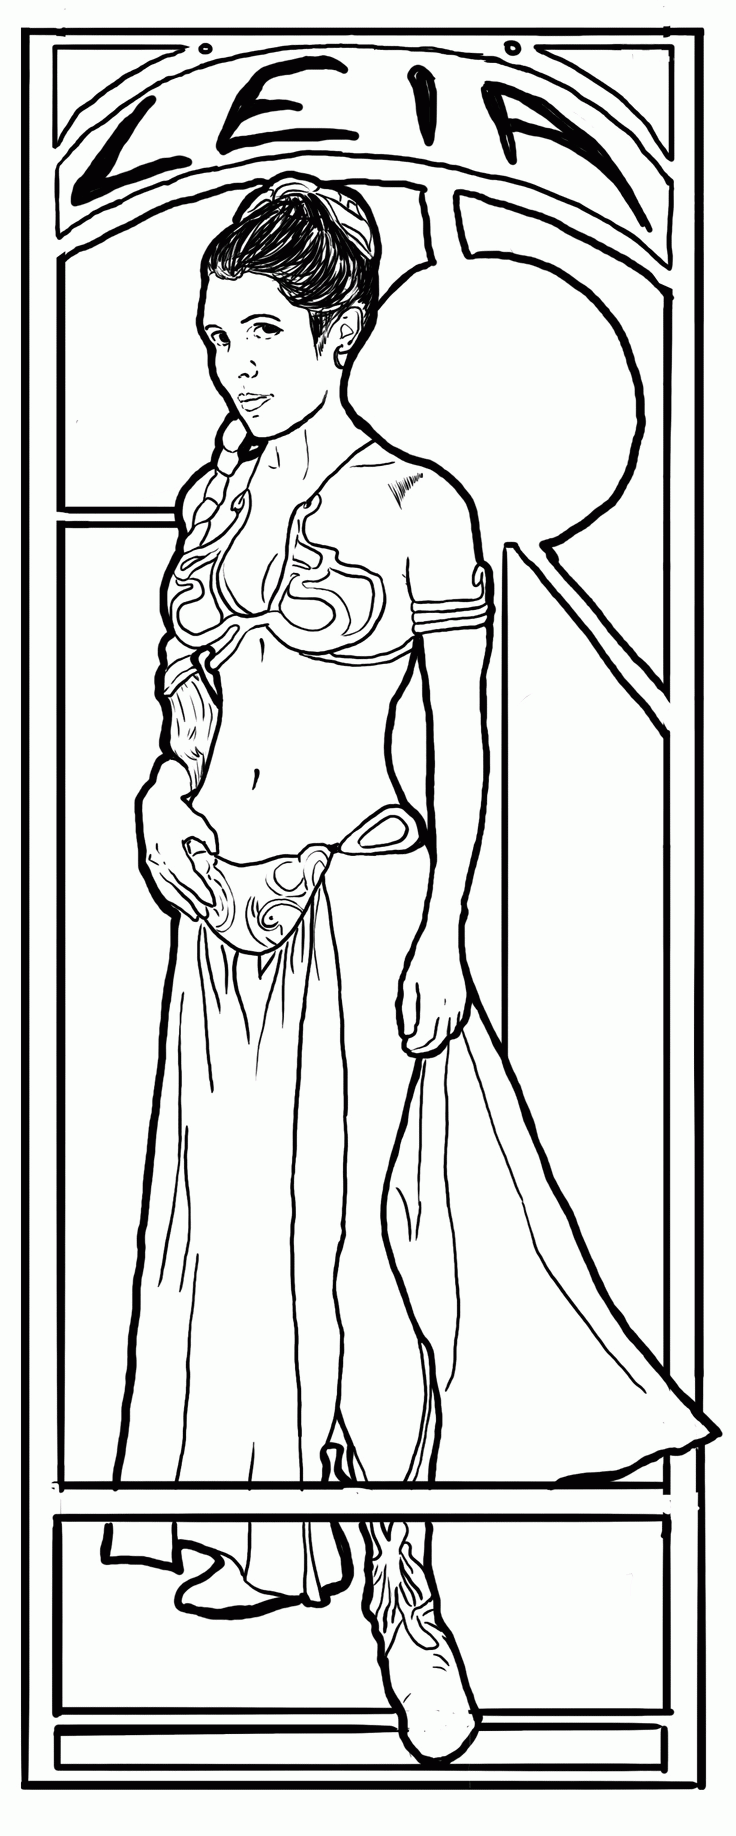 Princess Leia Coloring Pictures - Coloring Page